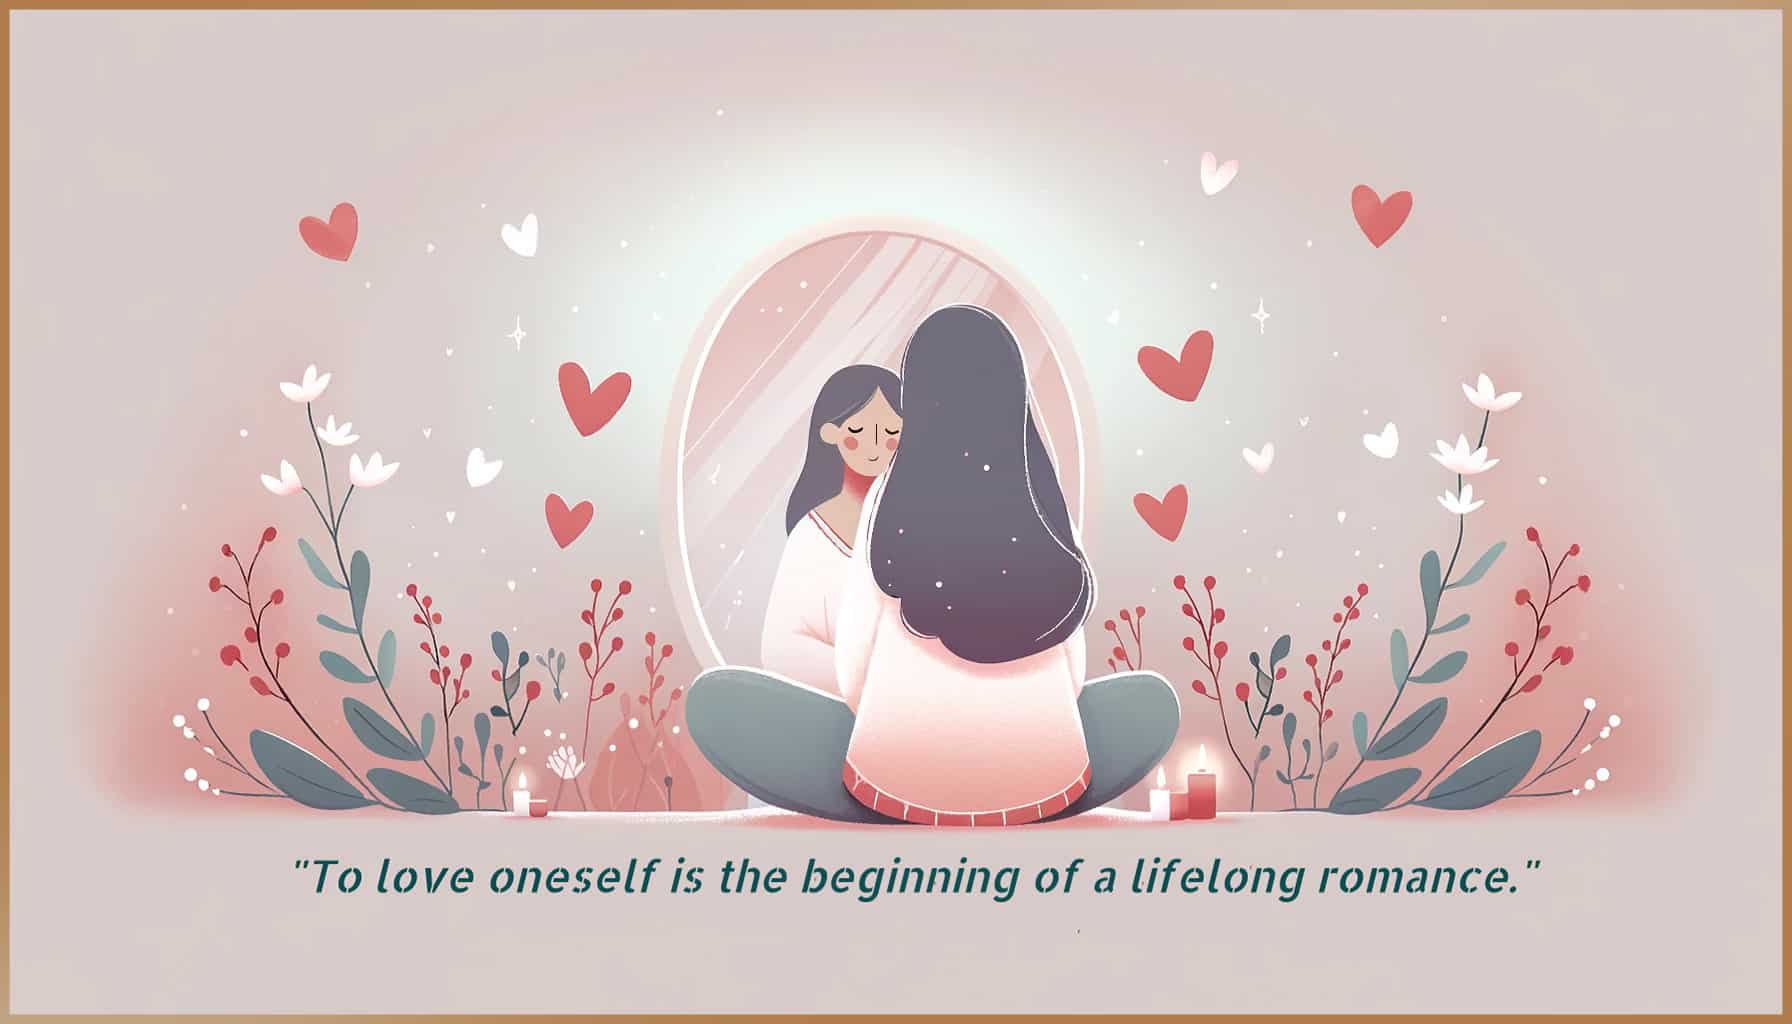 A woman reflects on self-love while looking at her reflection in the mirror, surrounded by hearts and nature.